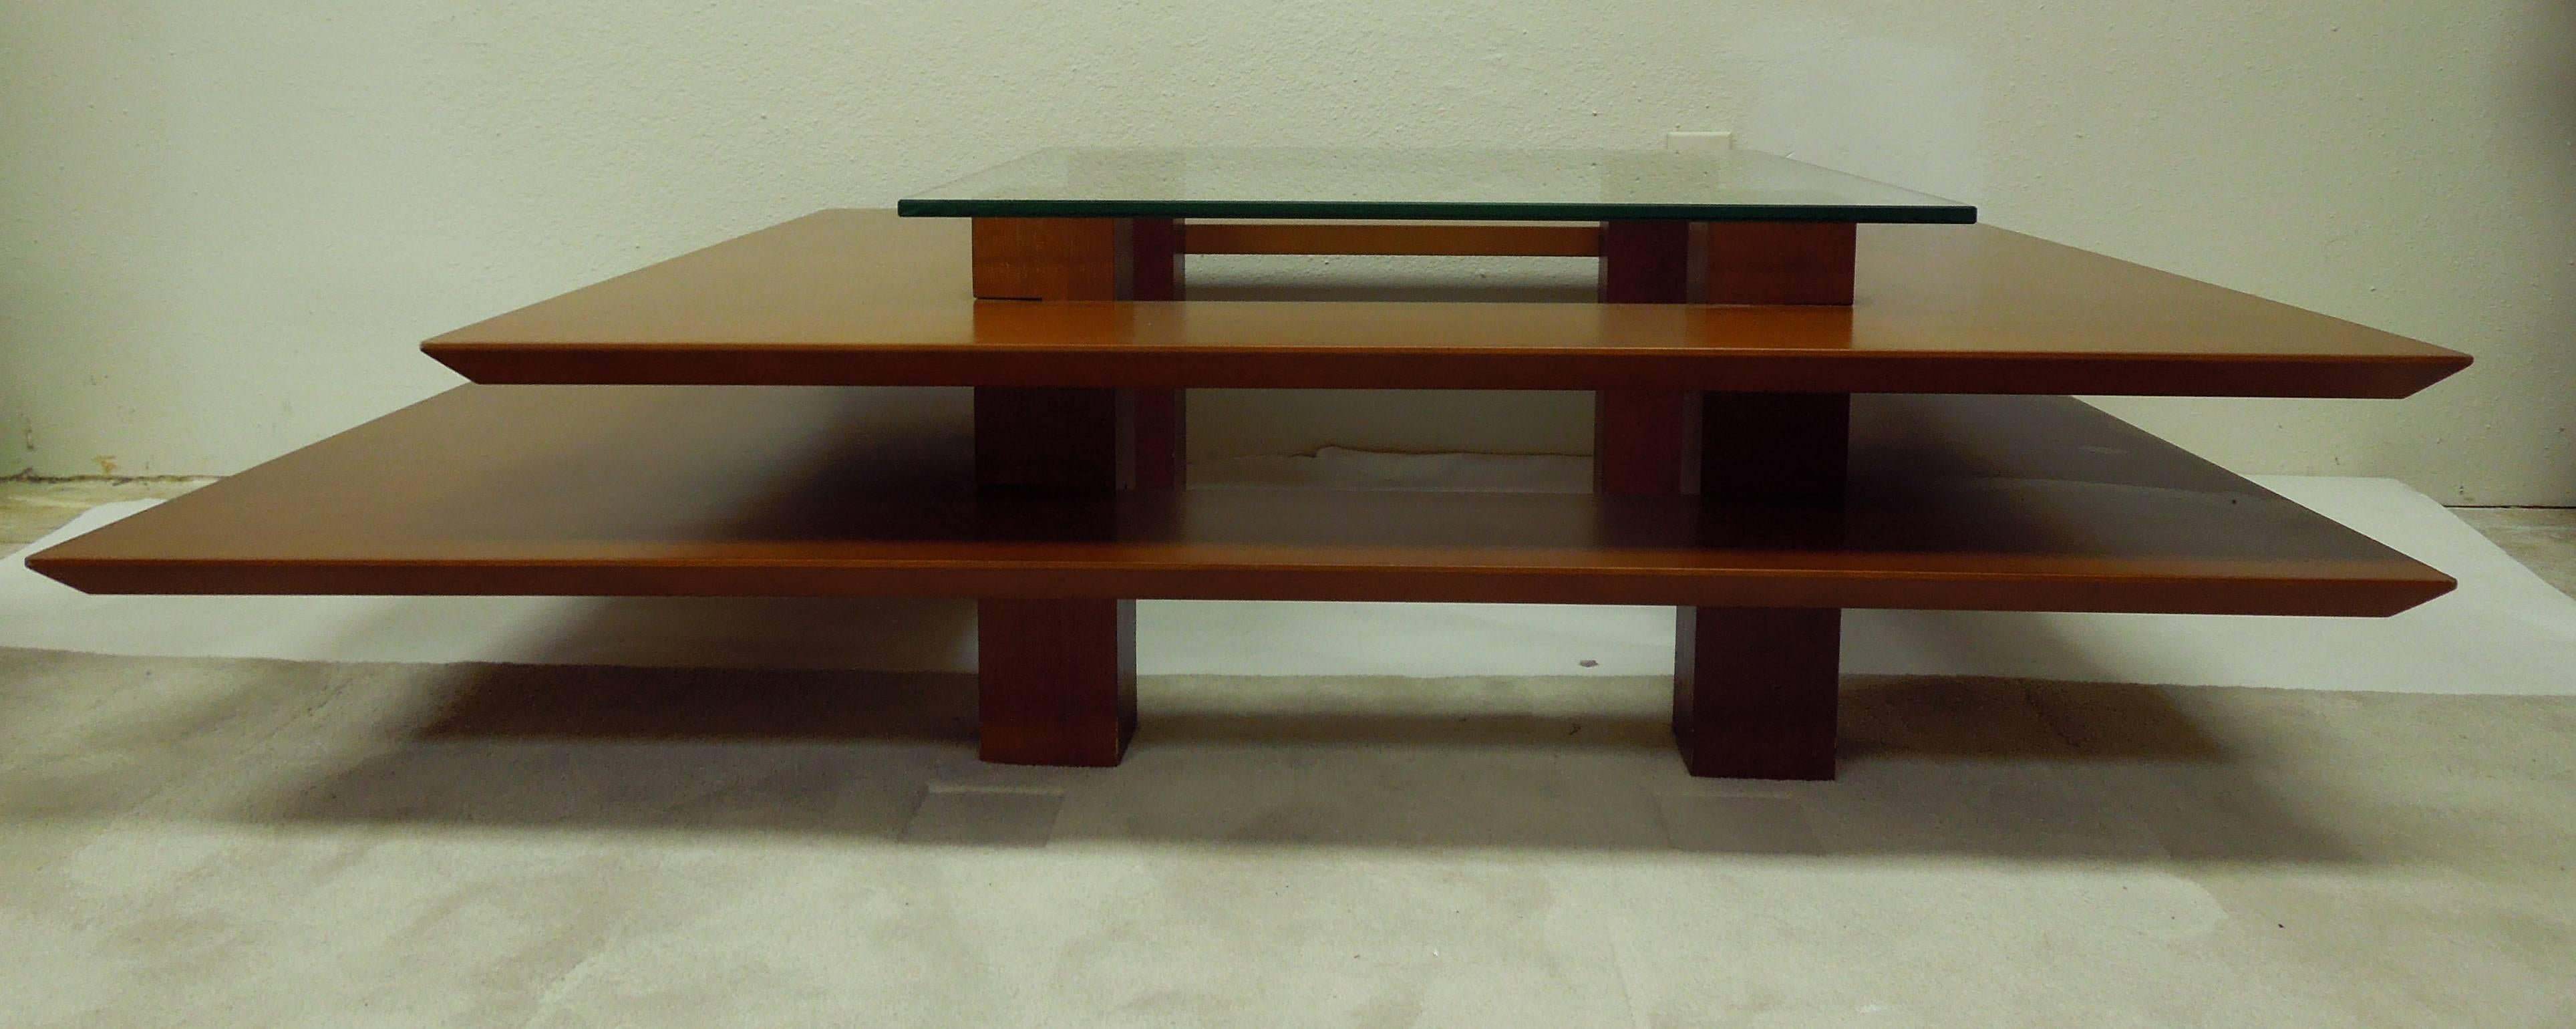 An architectural coffee table designed by French artist Clemmer Heidsieck. Purchased in nice, France. Combination of beech veneer and ashwood. Square glass tired top.